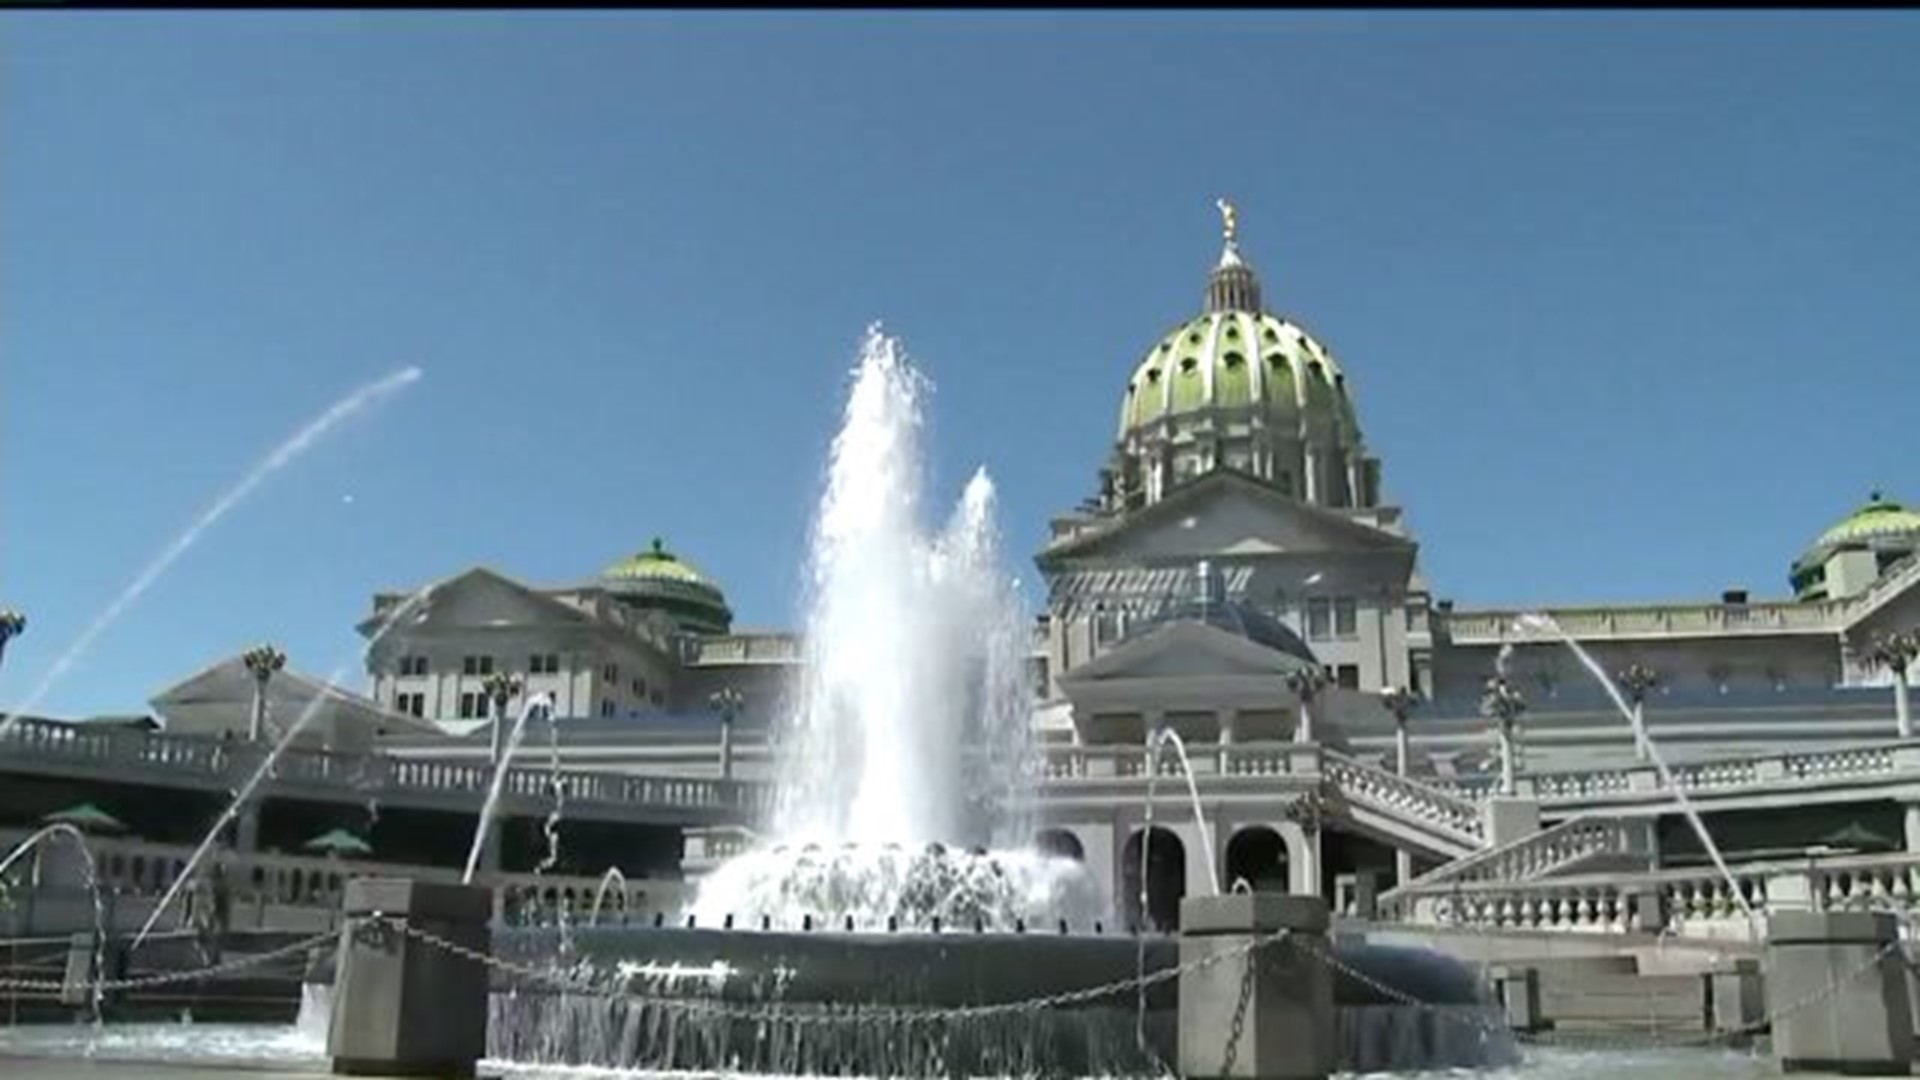 Governor to Propose Combining Offices to Close Budget Deficit